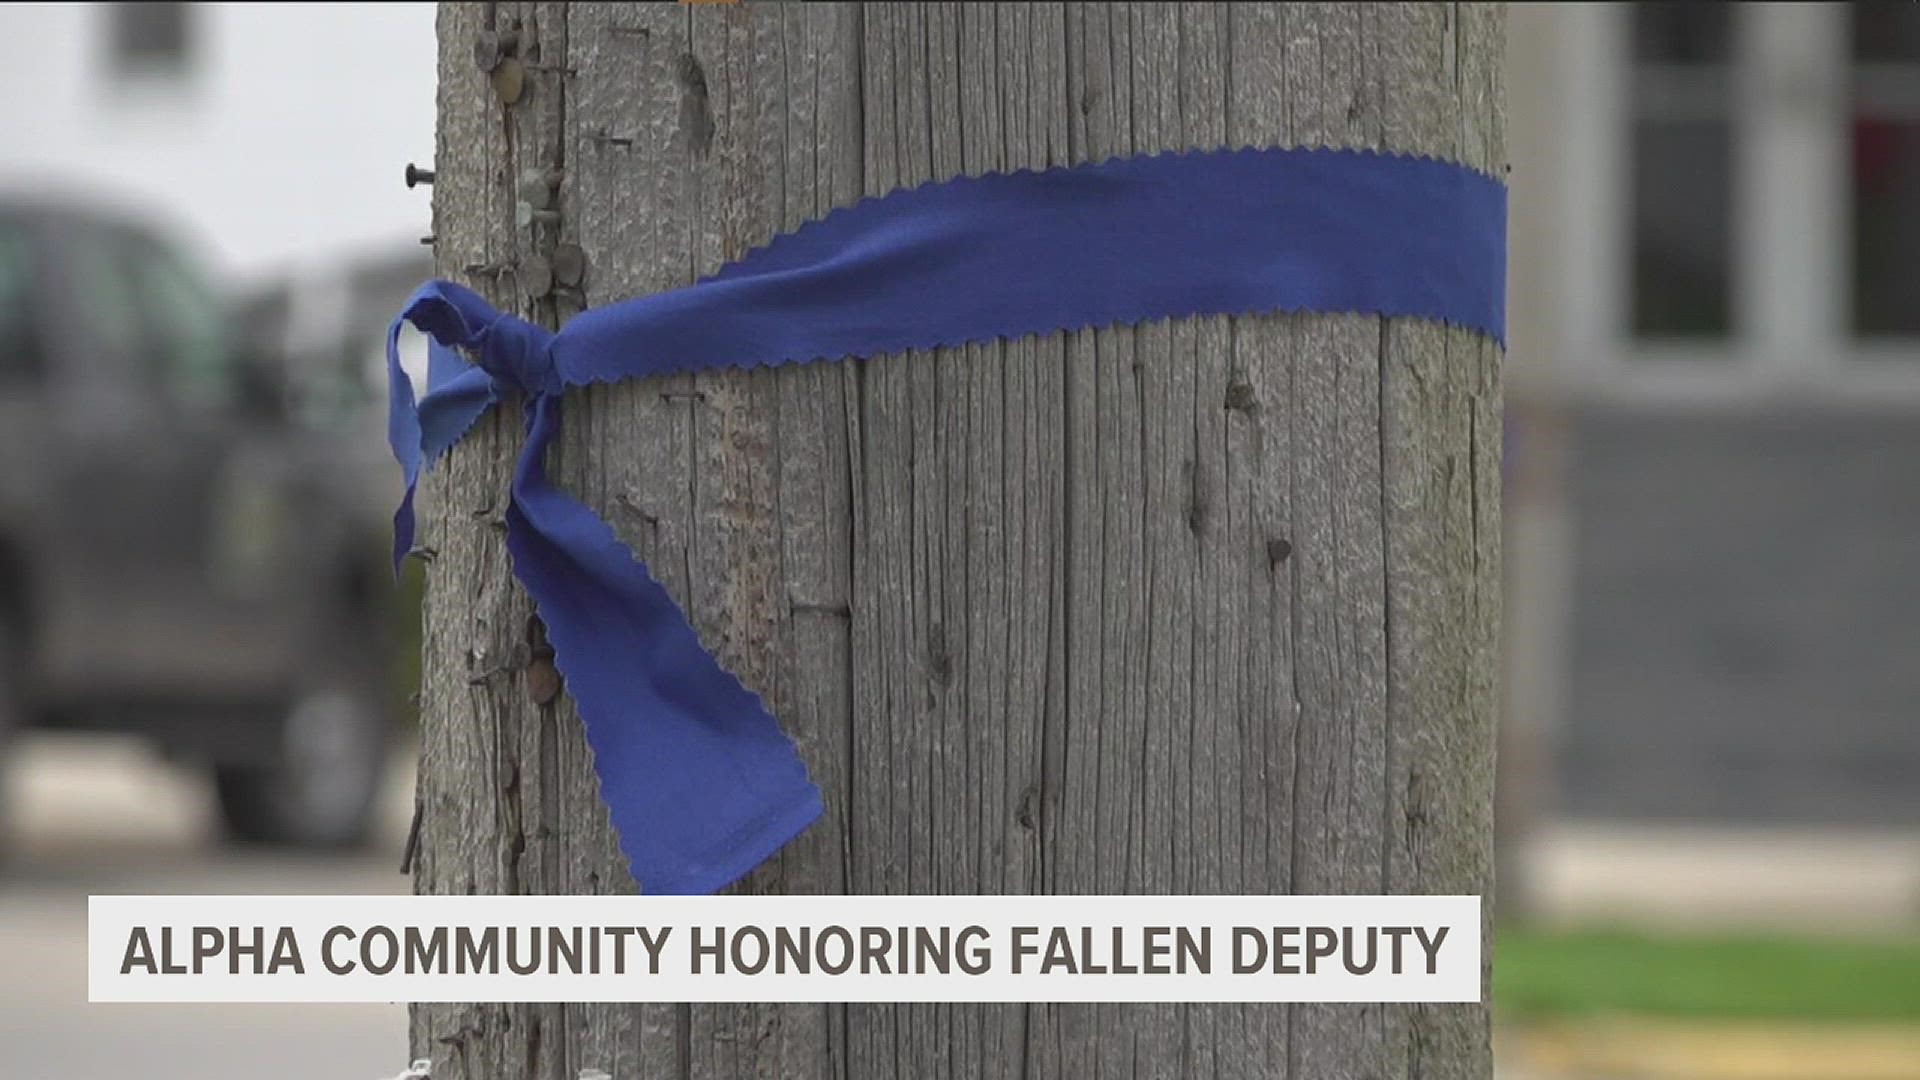 Community members in Alpha, Illinois, gathered for a blue ribbon ceremony to honor Nicholas Weist, a Knox County Sheriff's deputy killed in the line of duty,